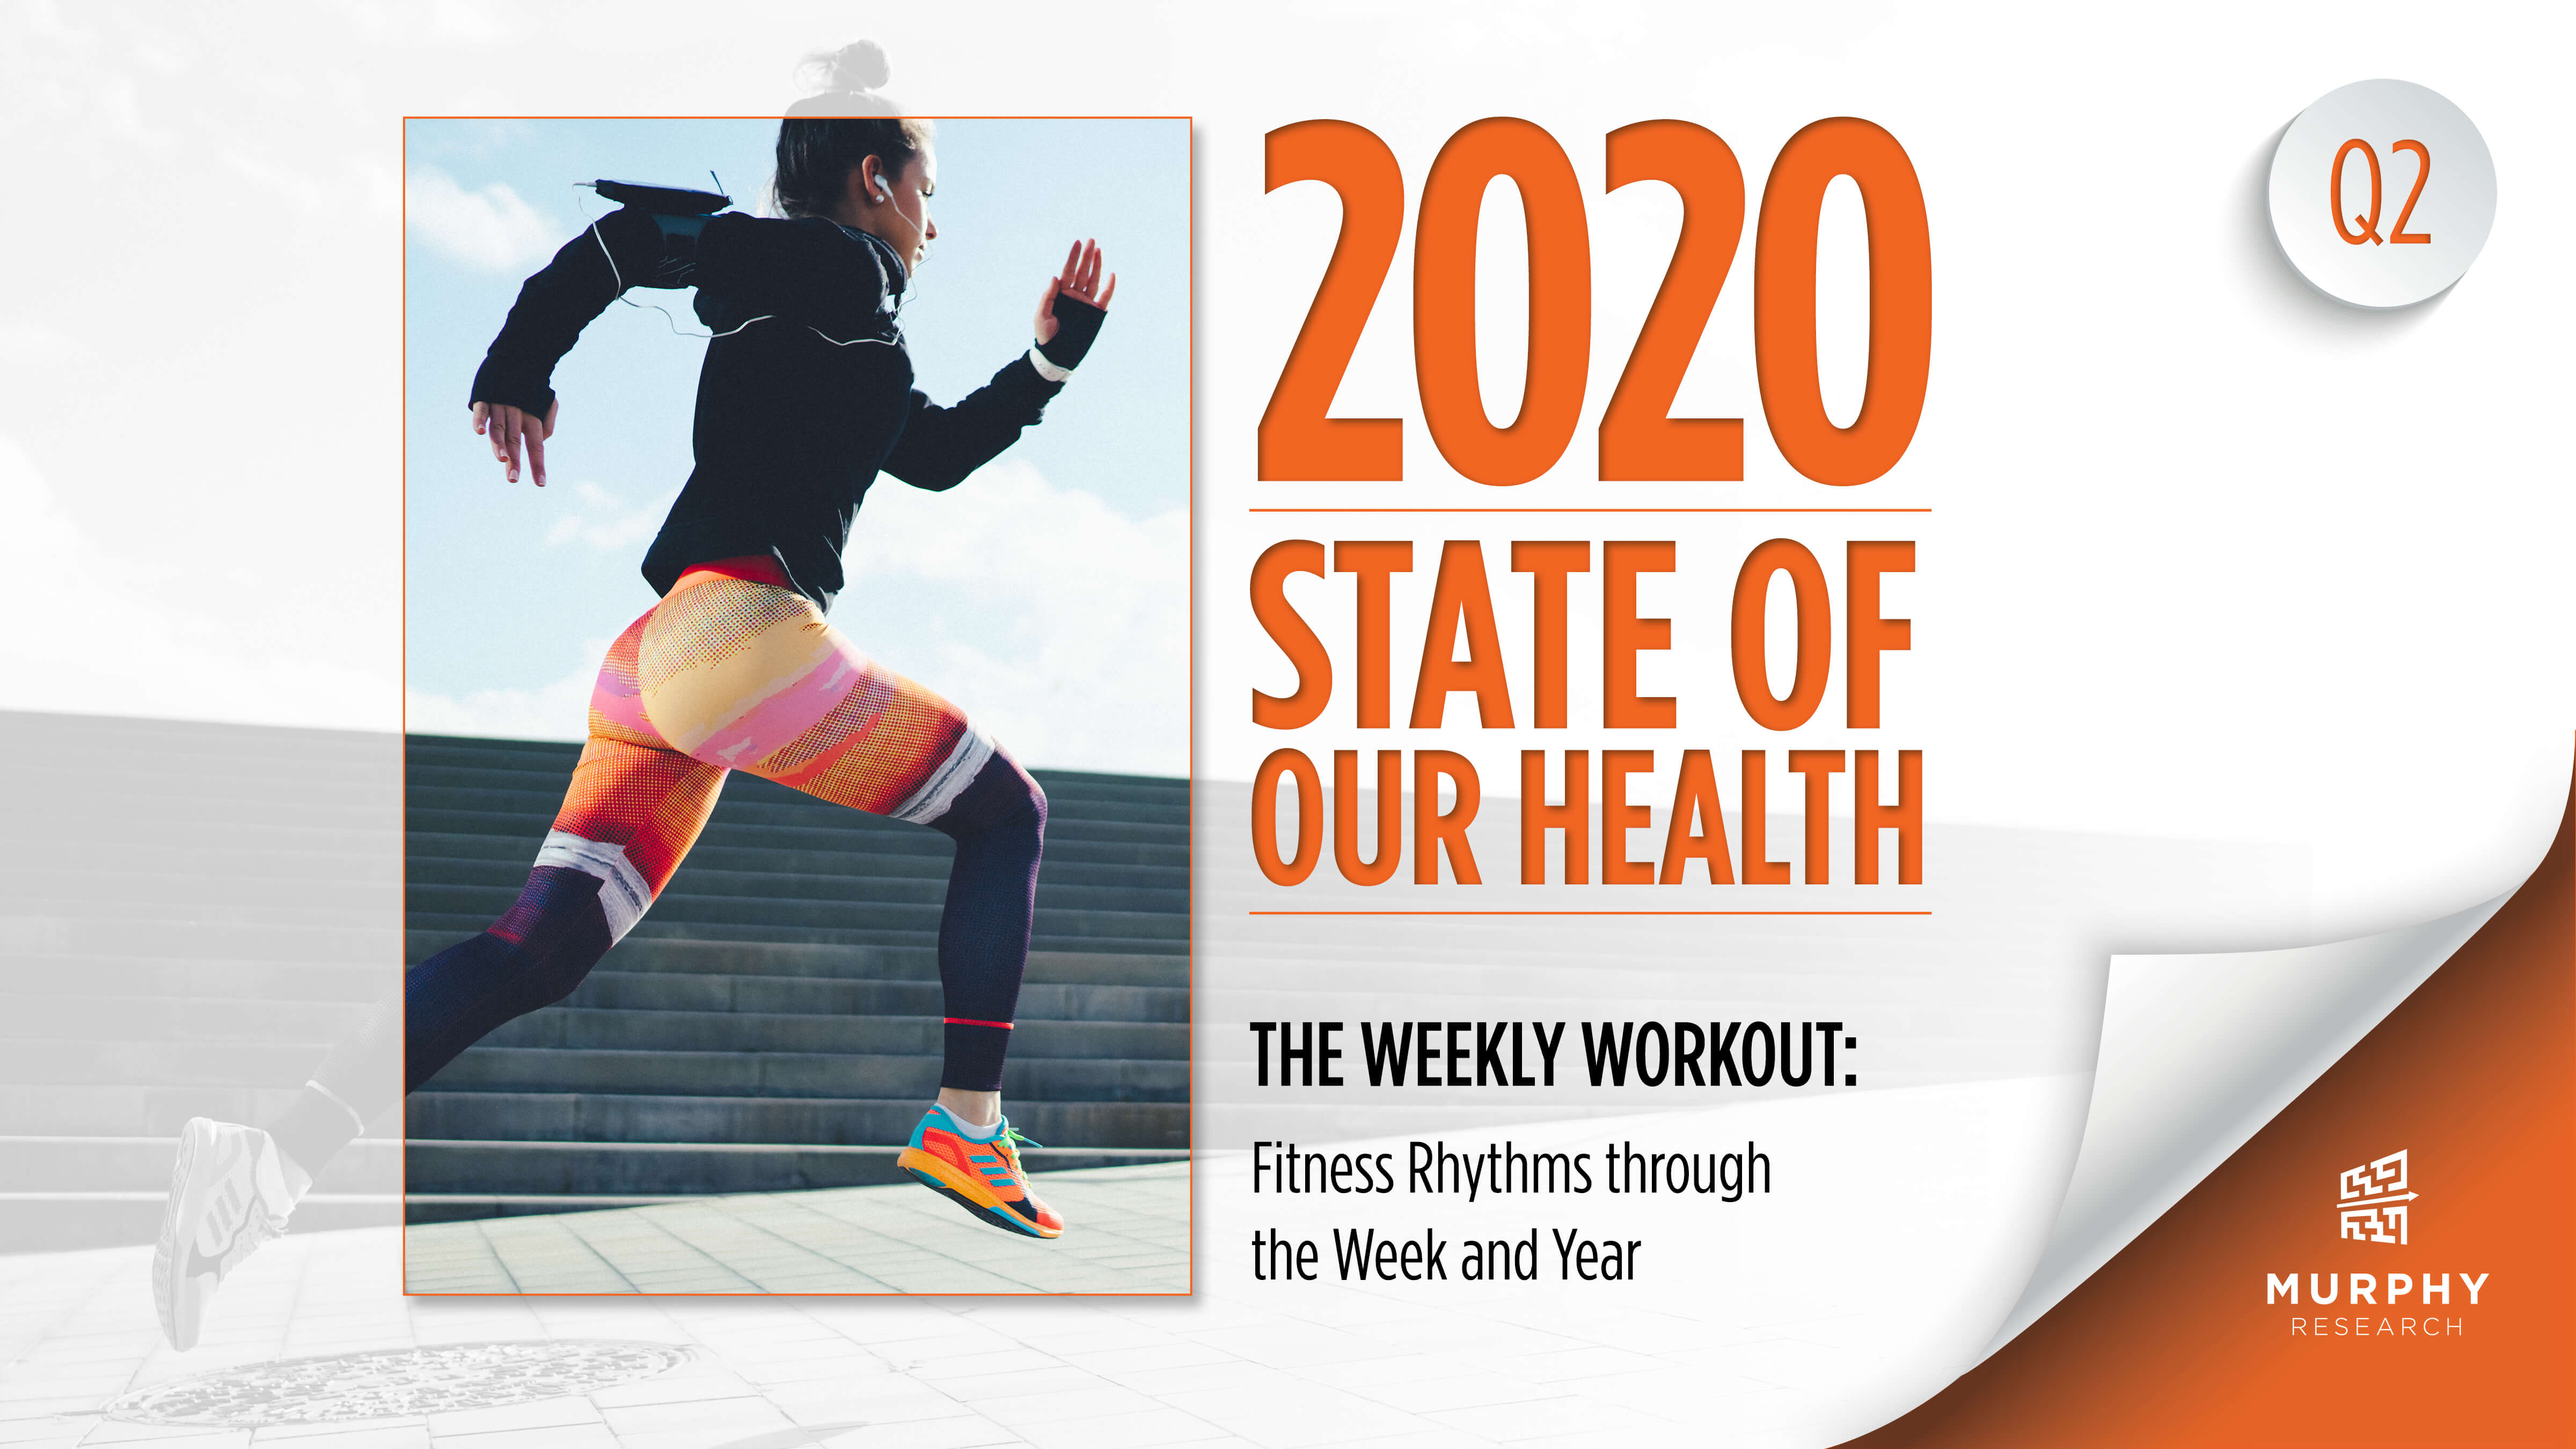 It’s Now Available! The Weekly Workout: Fitness Rhythms through the Week and Year